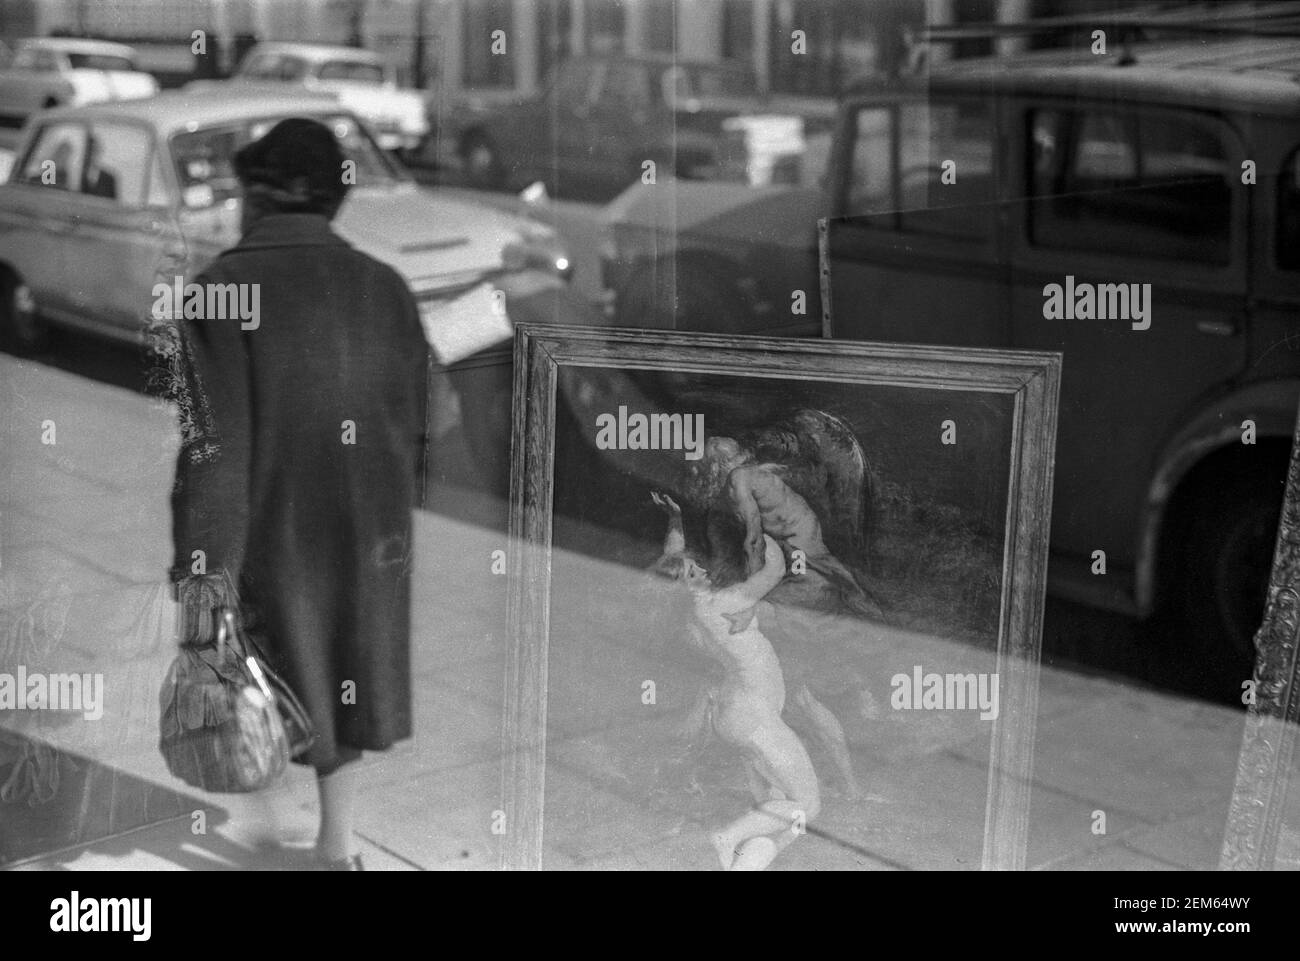 UK, West London, Notting Hill, 1973. Reflections in a shop window selling antiques & paintings. Outside is parked an old, antique car. Stock Photo